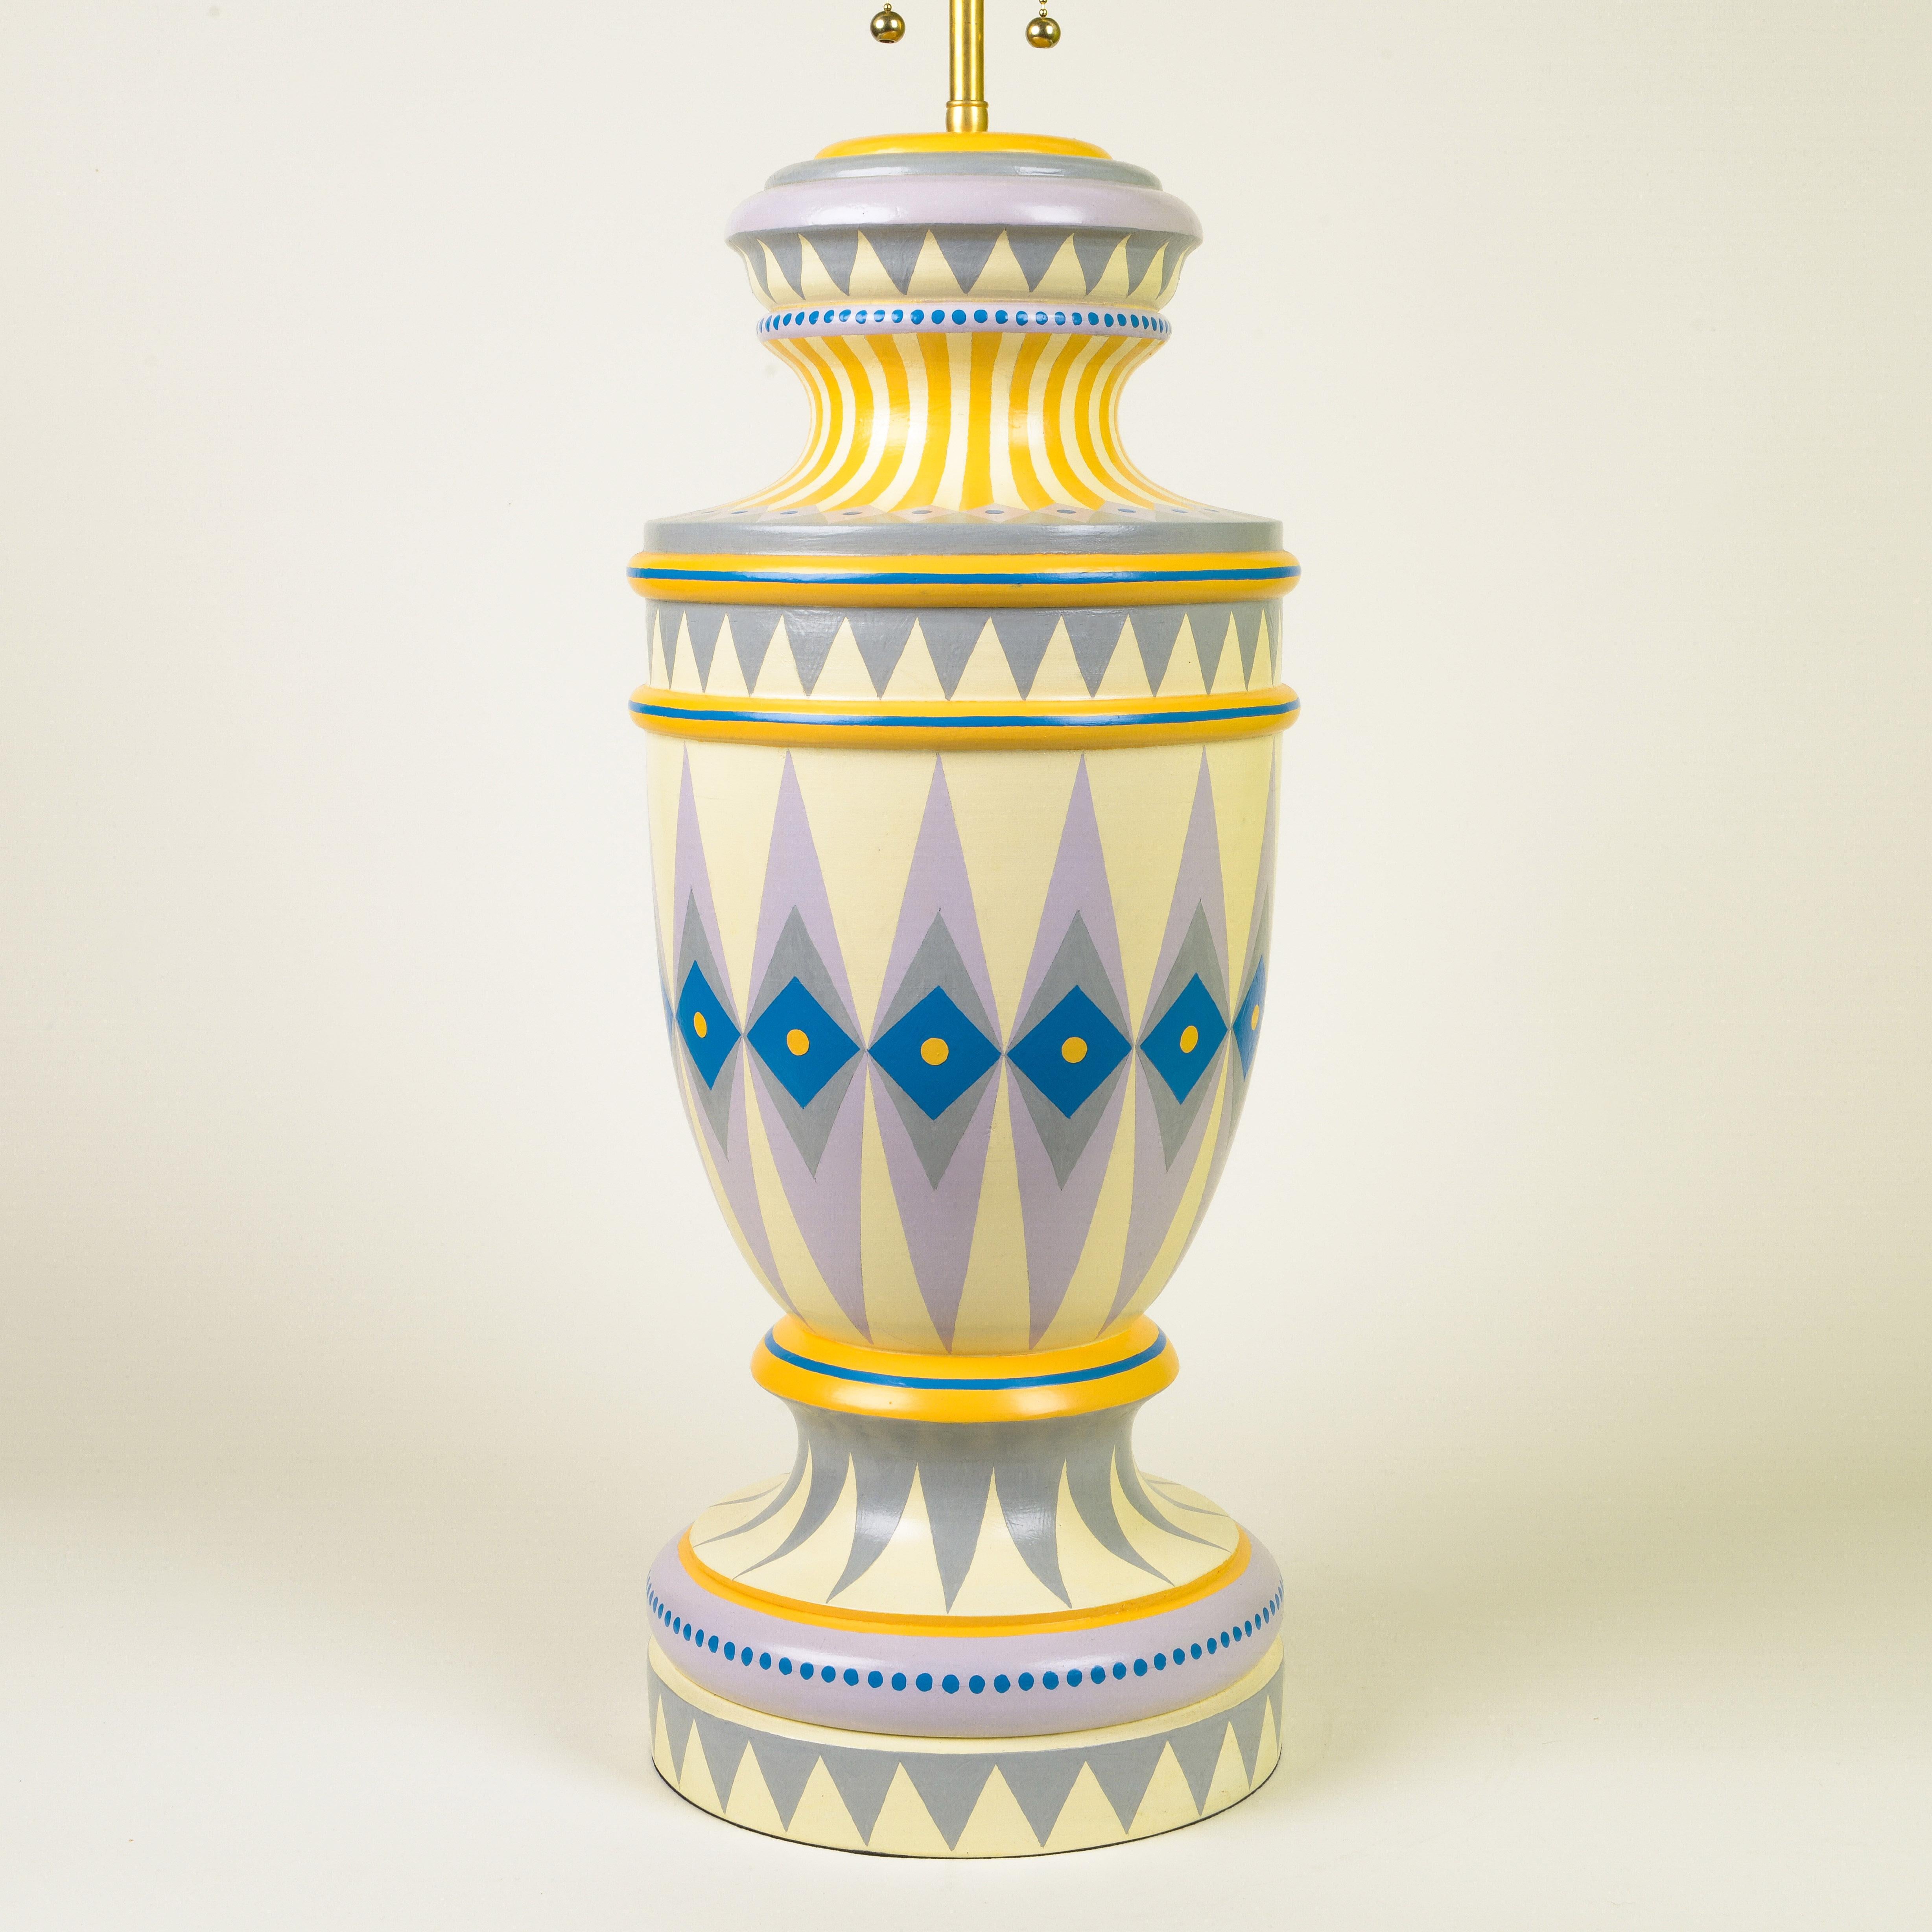 Giant Urn Lampbase with Matching Shade

Hand-painted giant urn lamp base with matching shade adorned with different shades of purple, dark blue, and yellow.

Cressida Bell is a British designer specialising in textiles and interiors. From her London